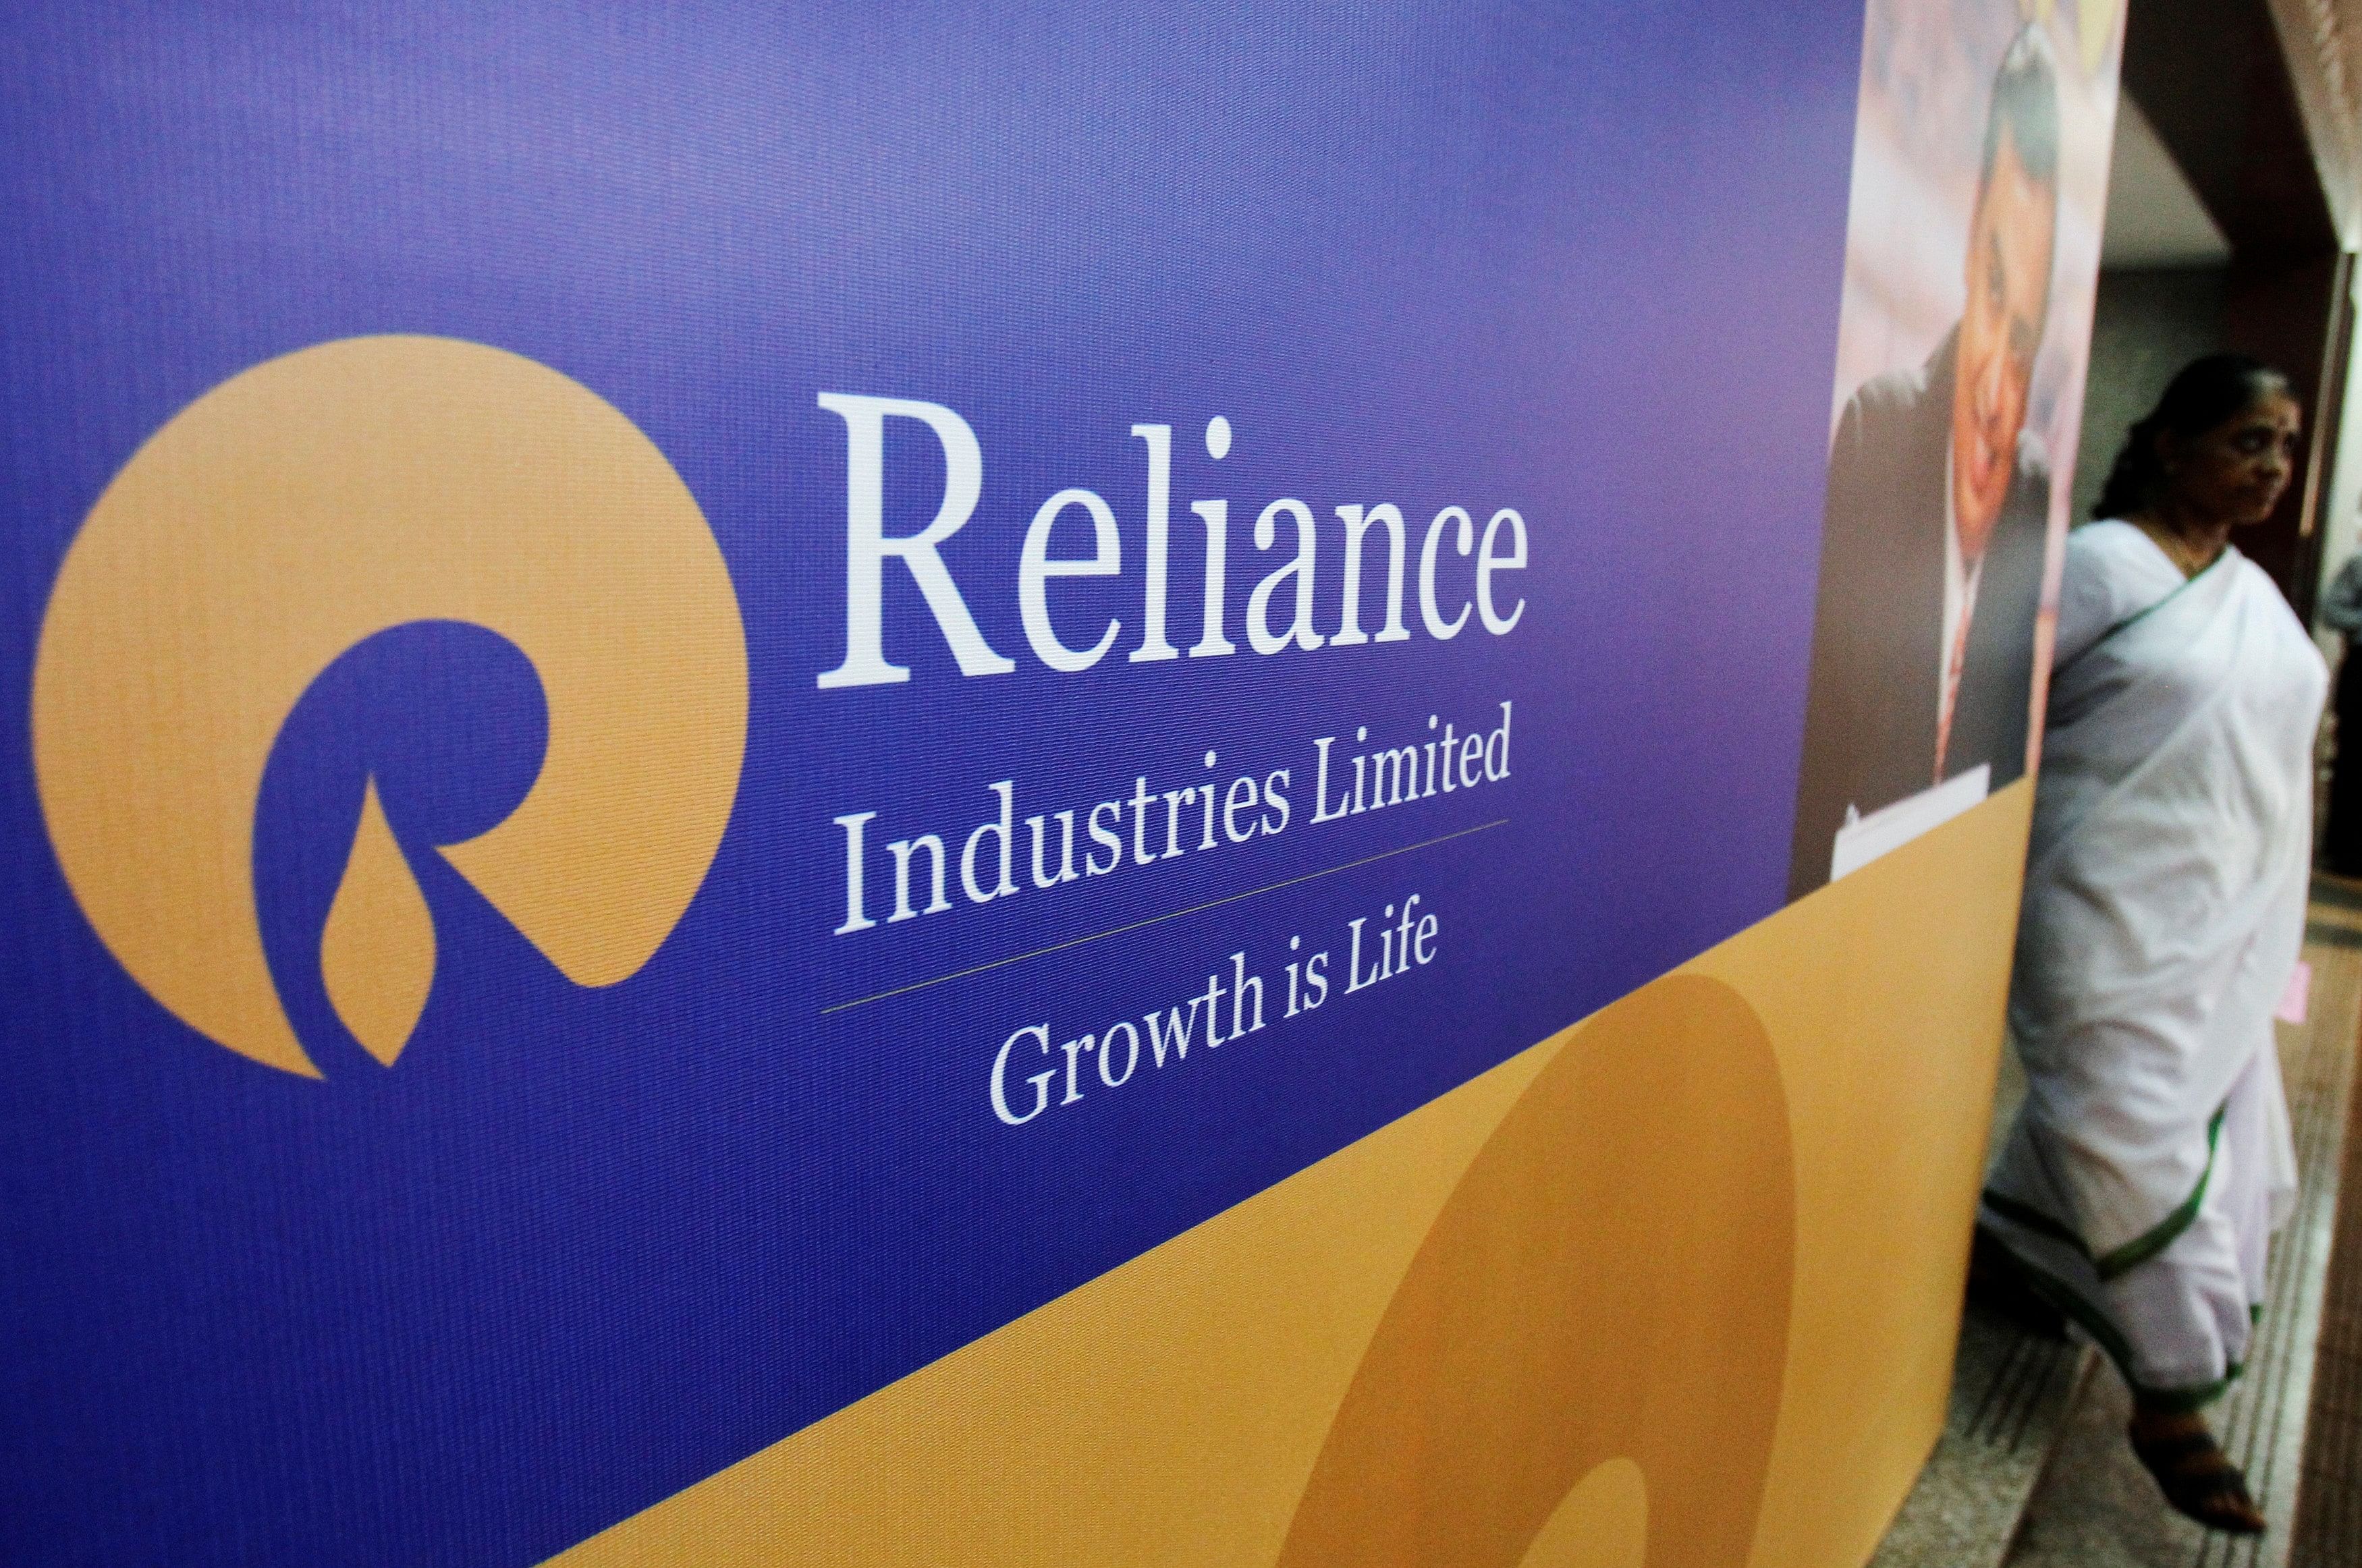 RIL had planned to raise about Rs 4,550 crore through bank loans while infusing Rs 500 crore equity in the company. (Credit: Reuters Photo)